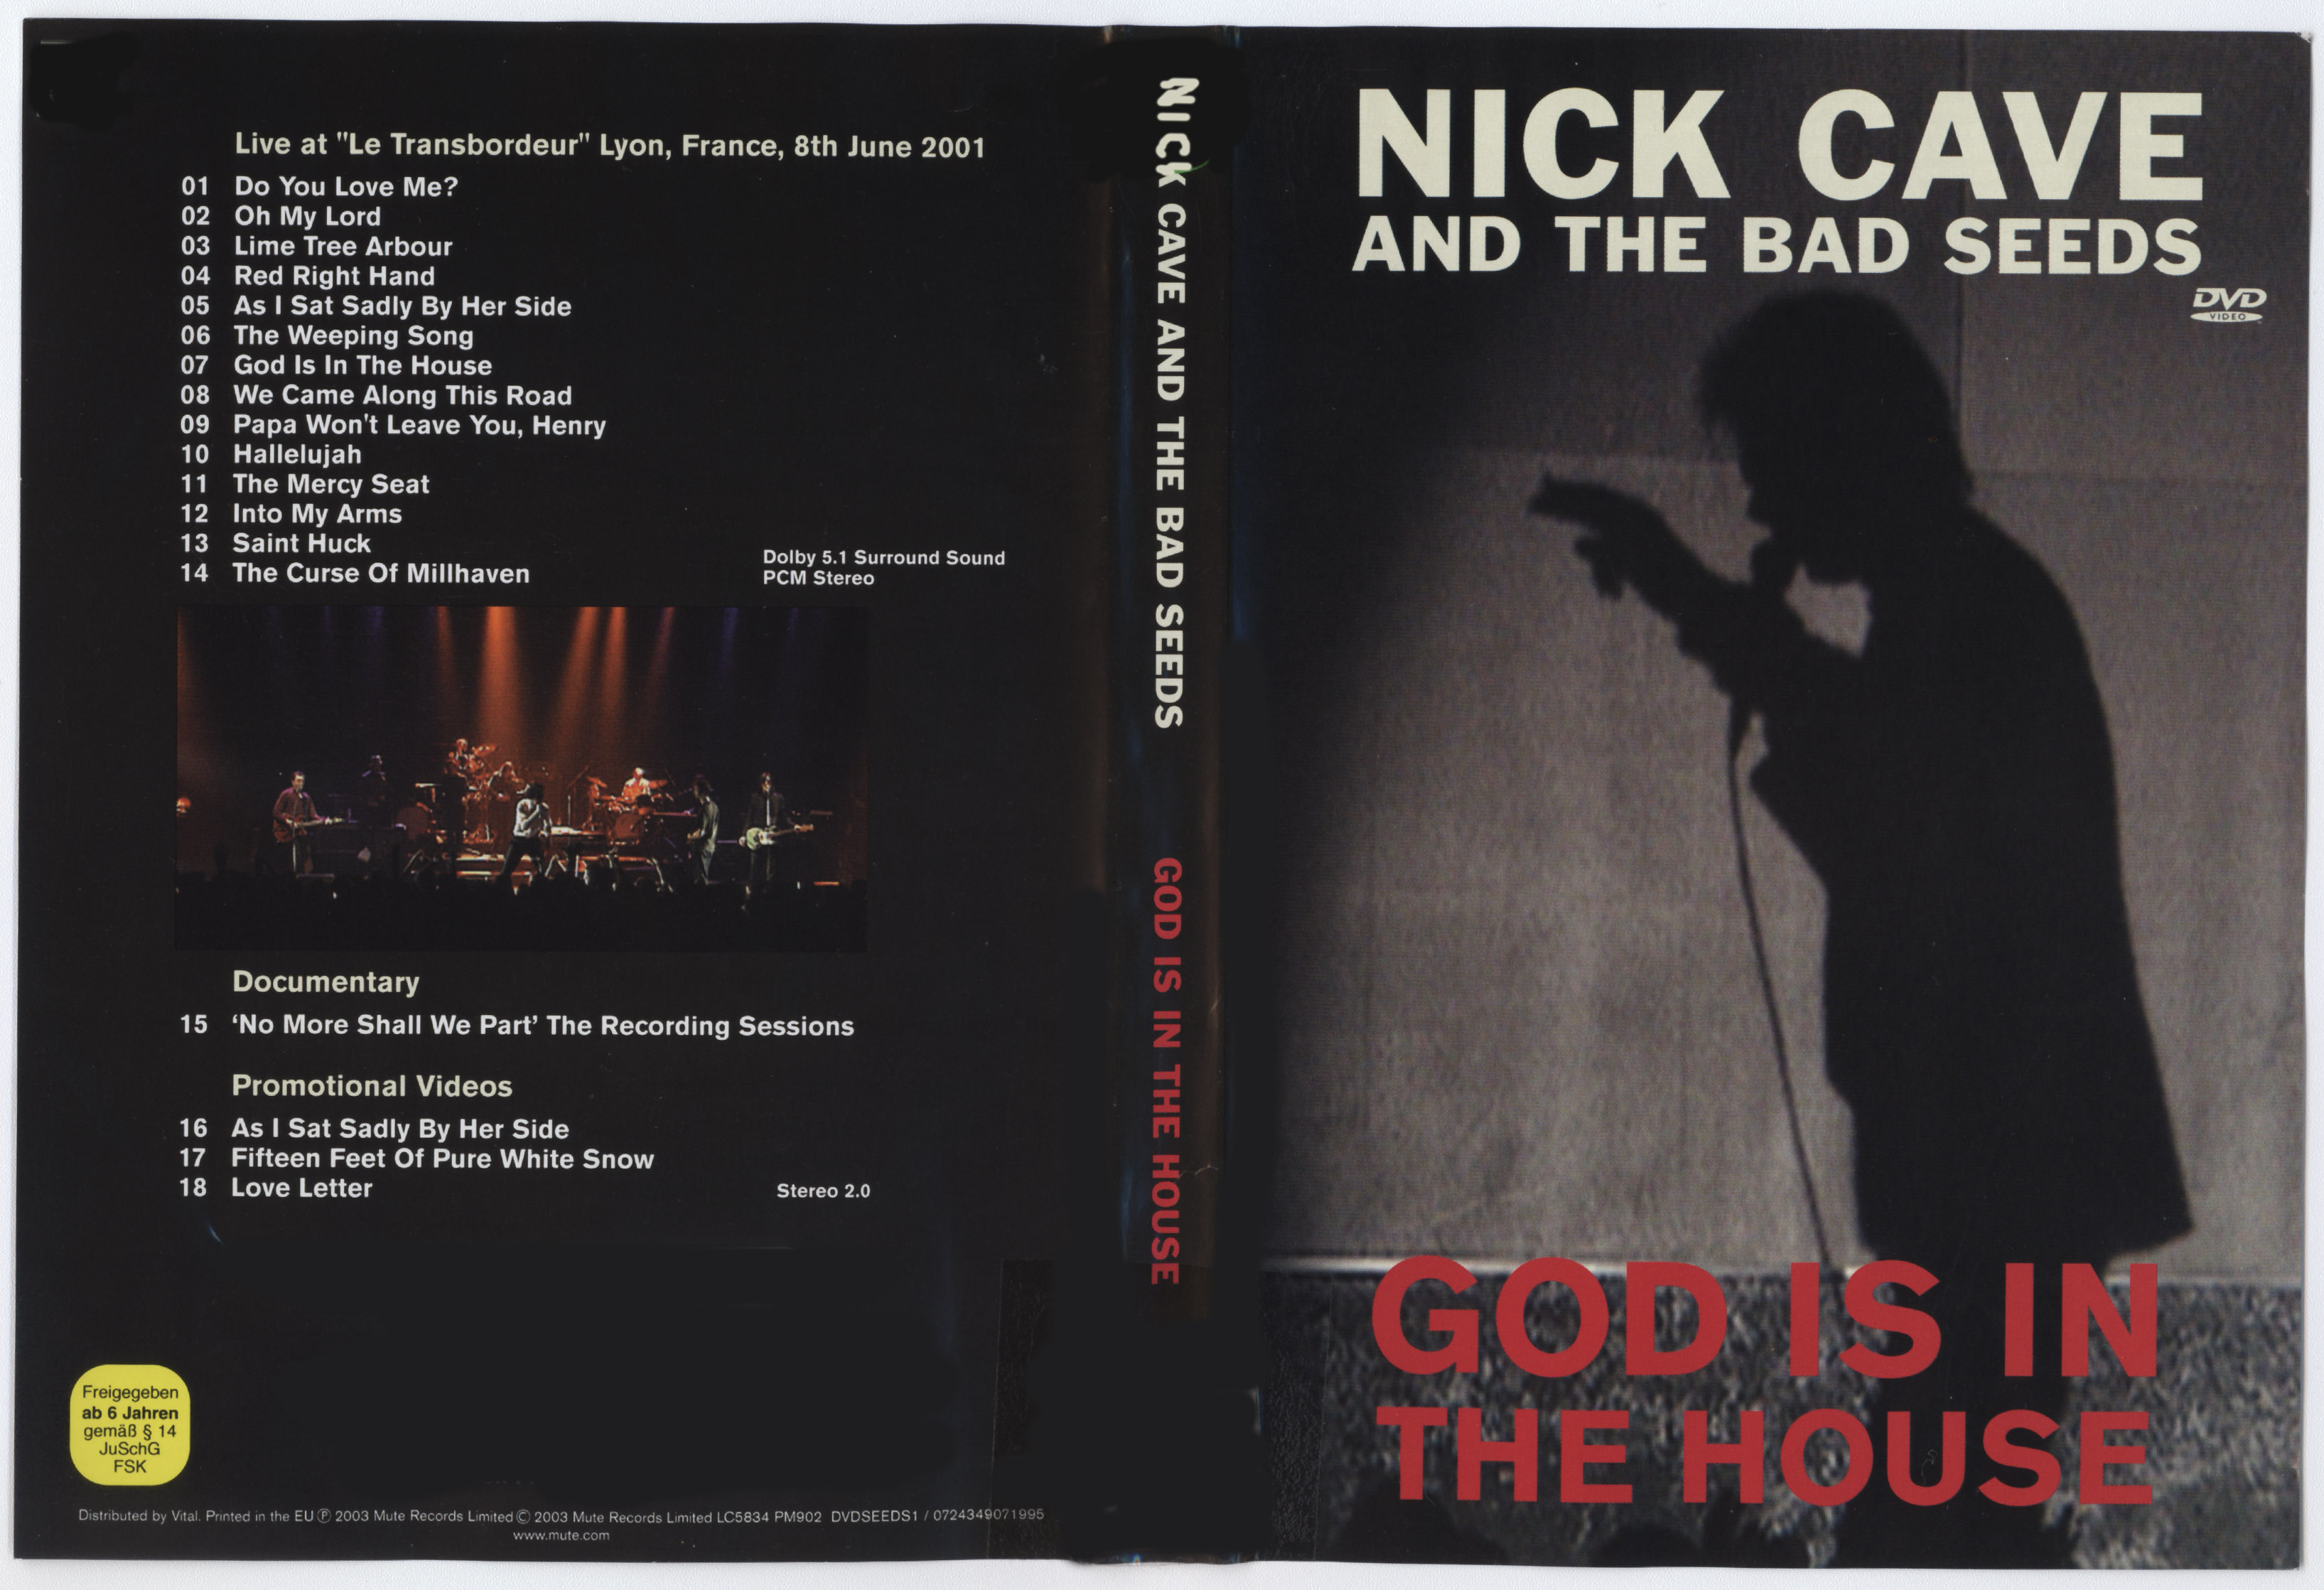 Jaquette DVD Nick Cave God in the house